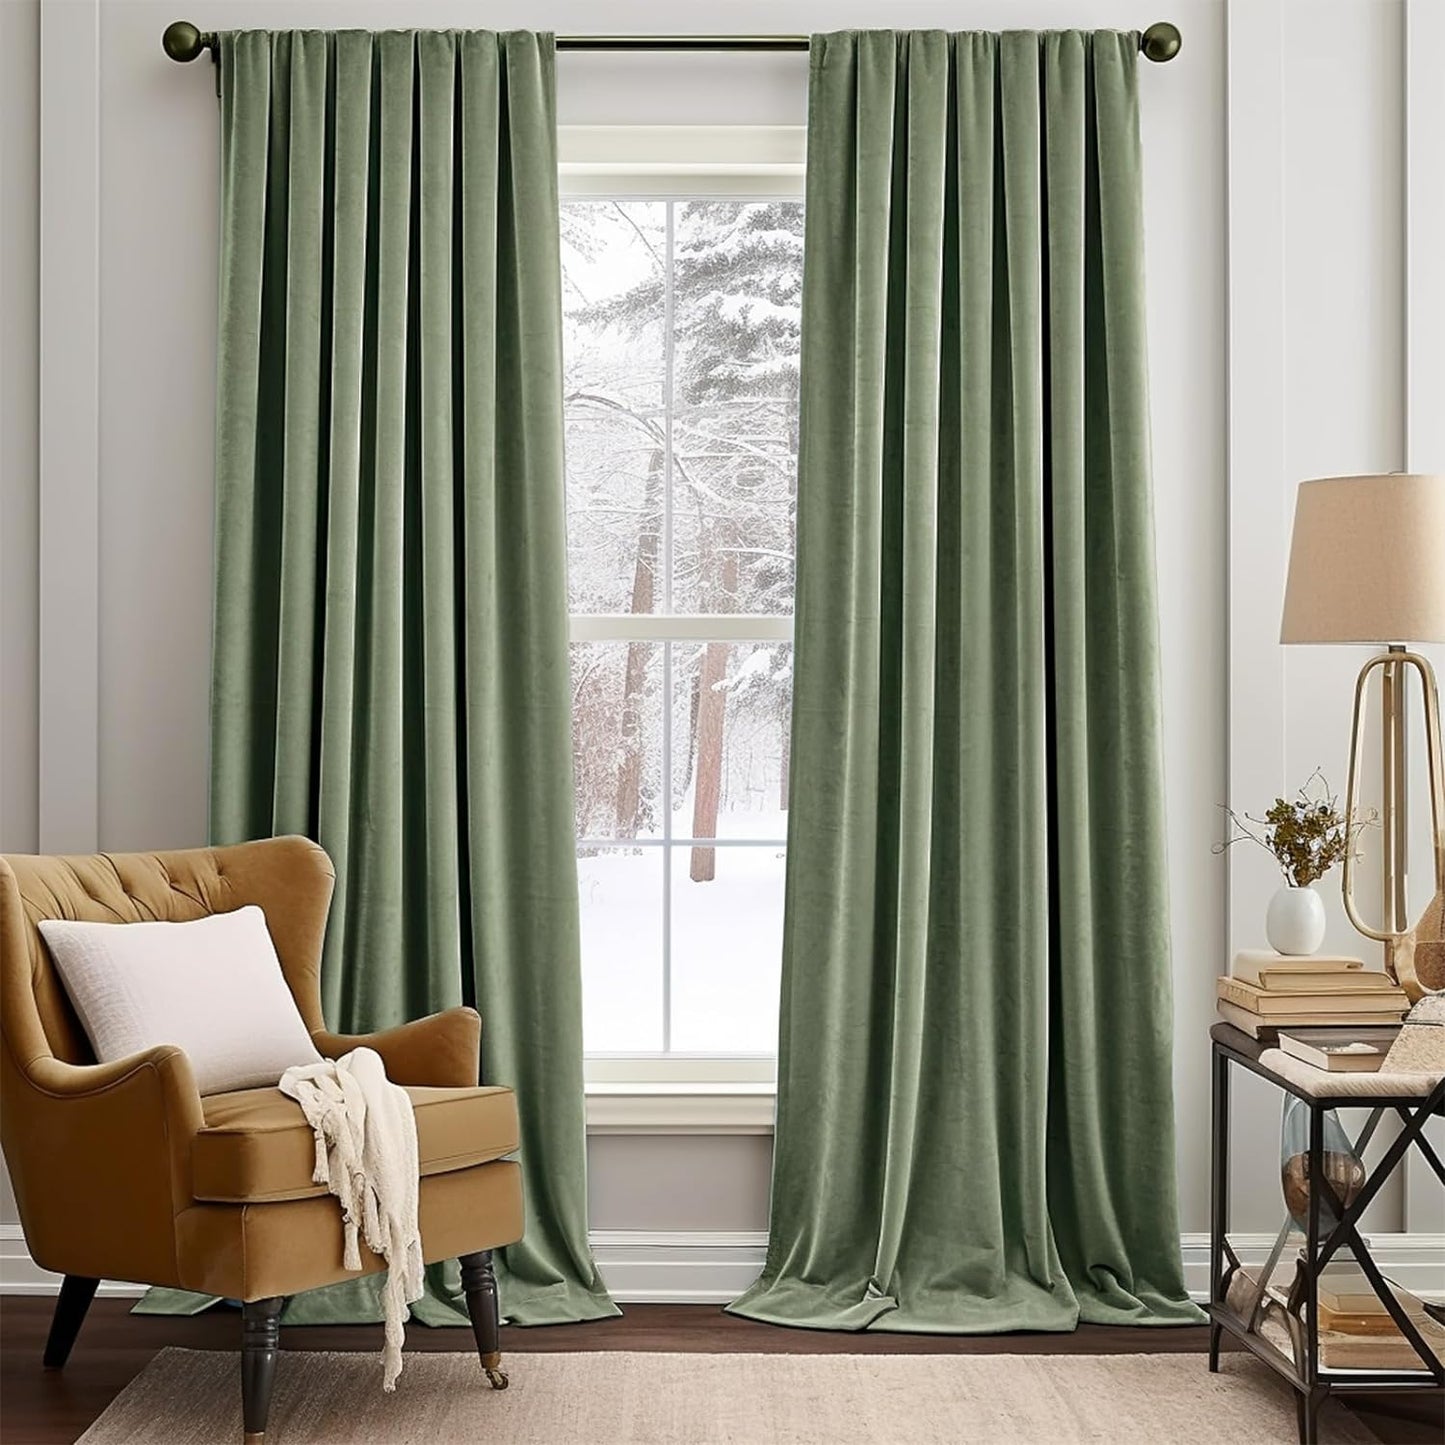 Jinchan Velvet Blackout Curtain for Living Room, Thermal Insulated Luxury Drape for Bedroom 96 Inch Long, Stylish Soft Privacy Room Darkening Window Treatment Rod Pocket 1 Panel, Emerald Green  CKNY HOME FASHION Rod Pocket | Sage Green W52 X L120 